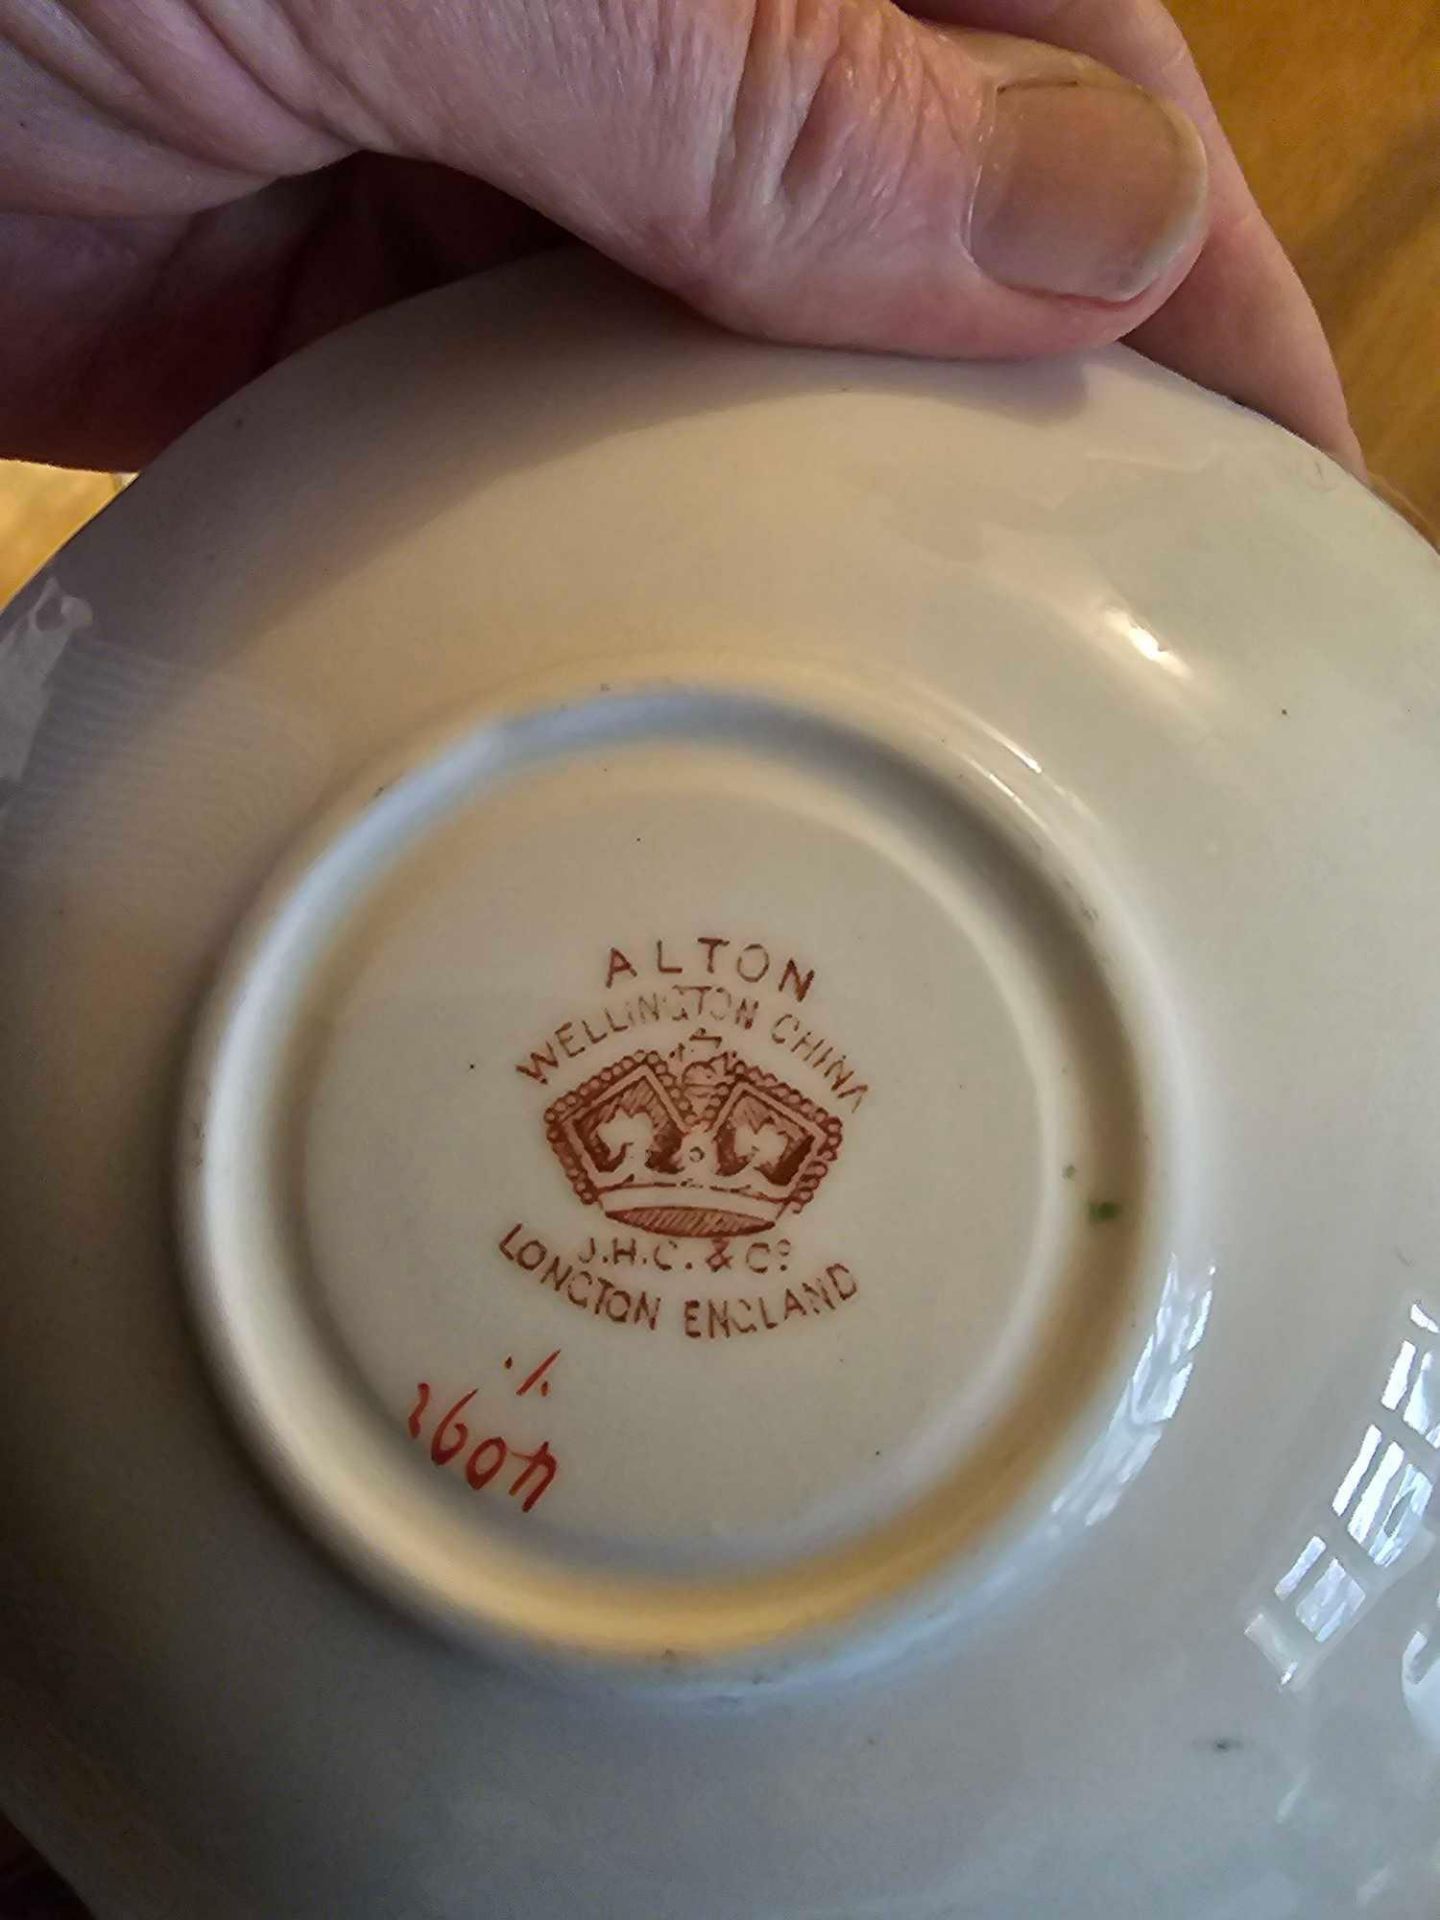 A Alton Wellington China JHC & Co Longton England Cup And Saucer With Wax Candle Inset - Image 3 of 3